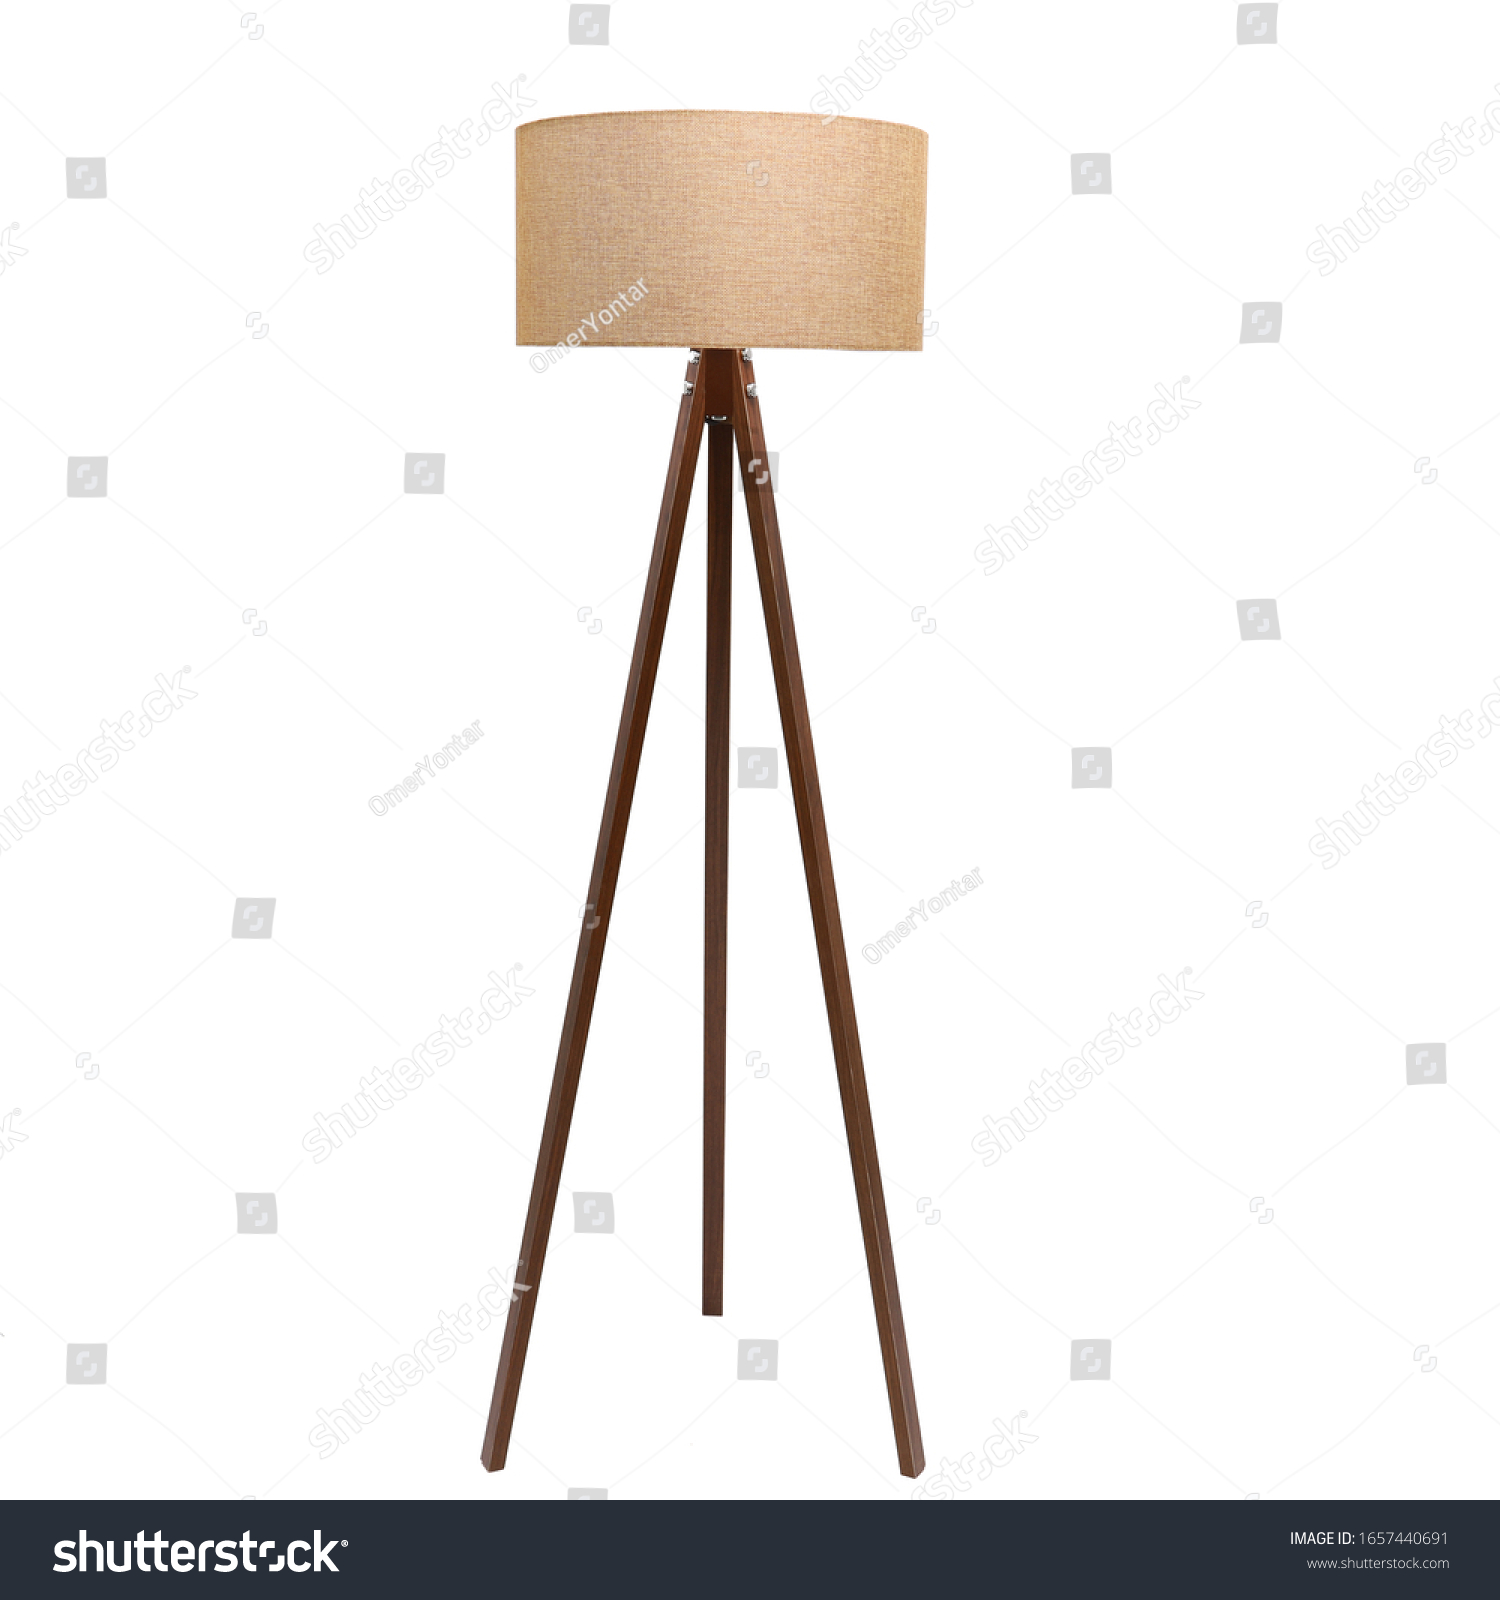 Home decoration and decorative lampshade #1657440691